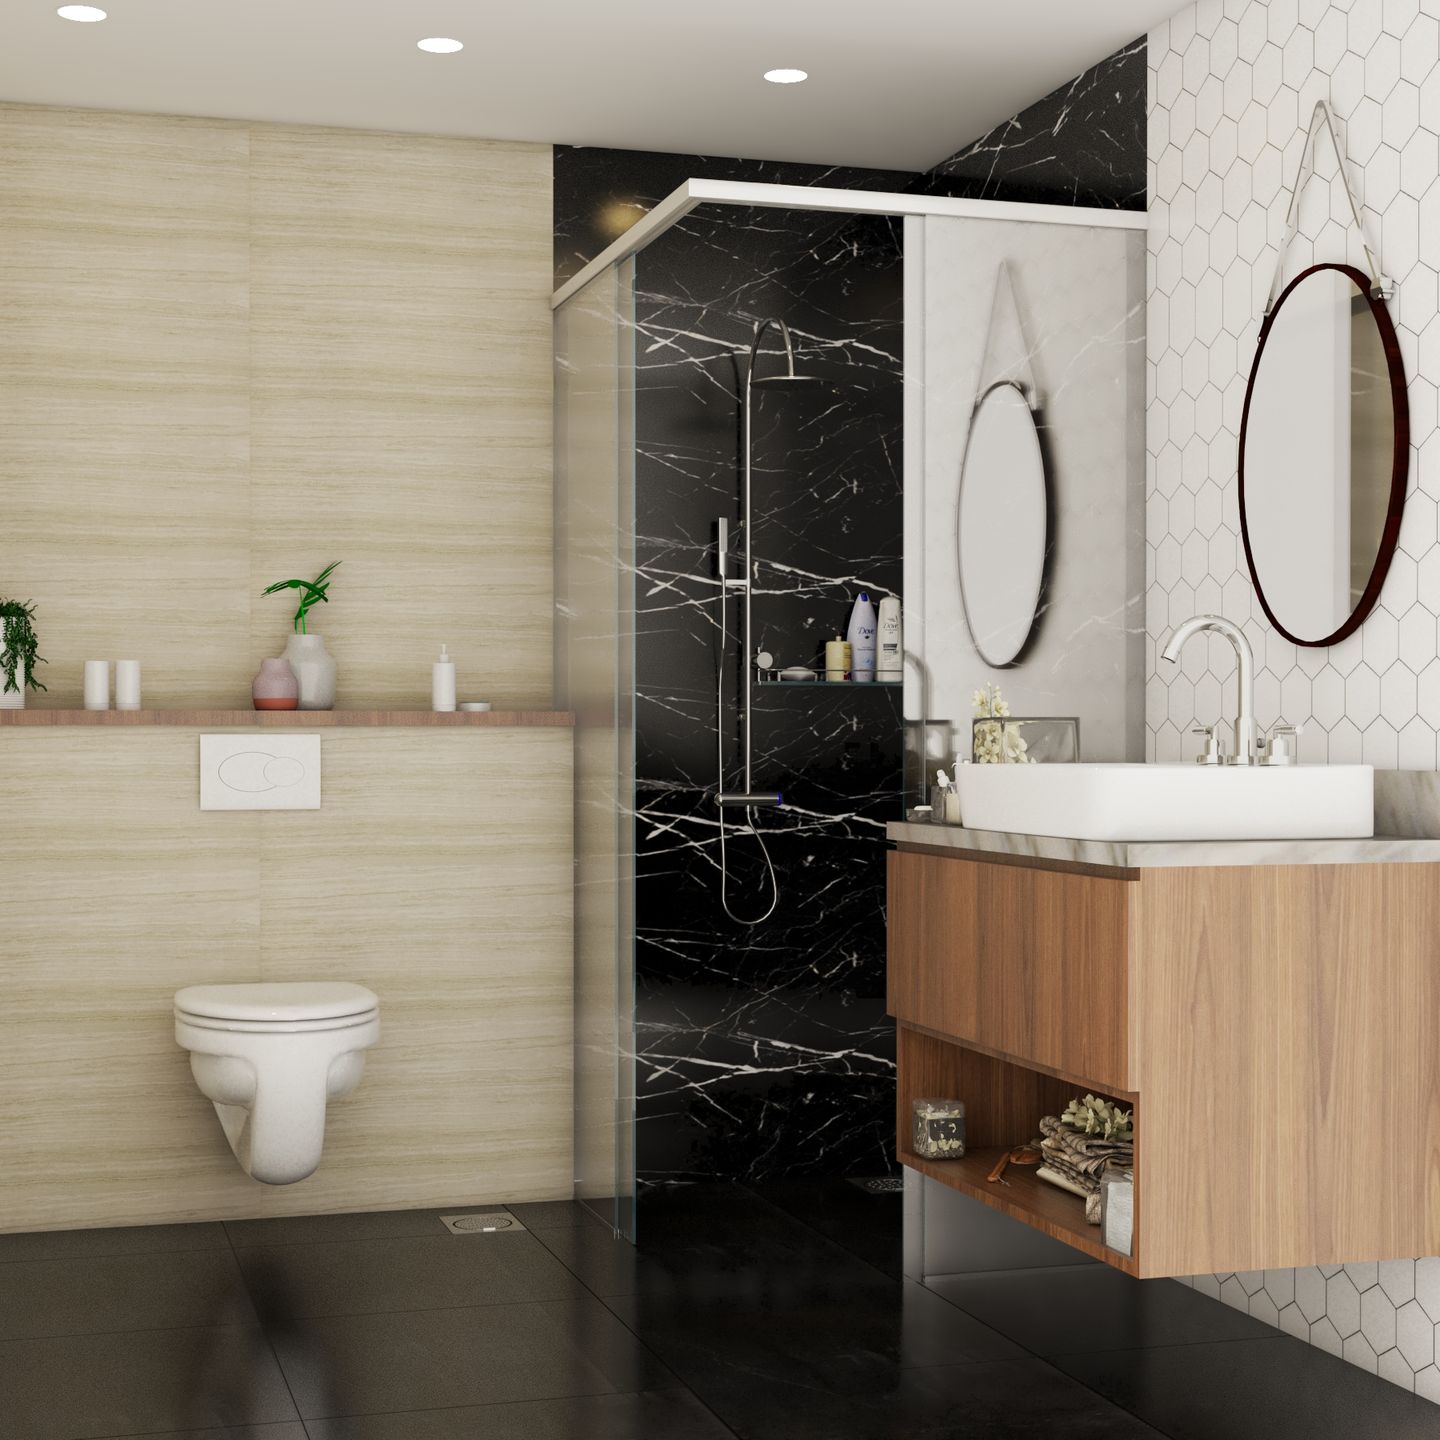 Modern Bathroom With A Shower Cubicle - Livspace